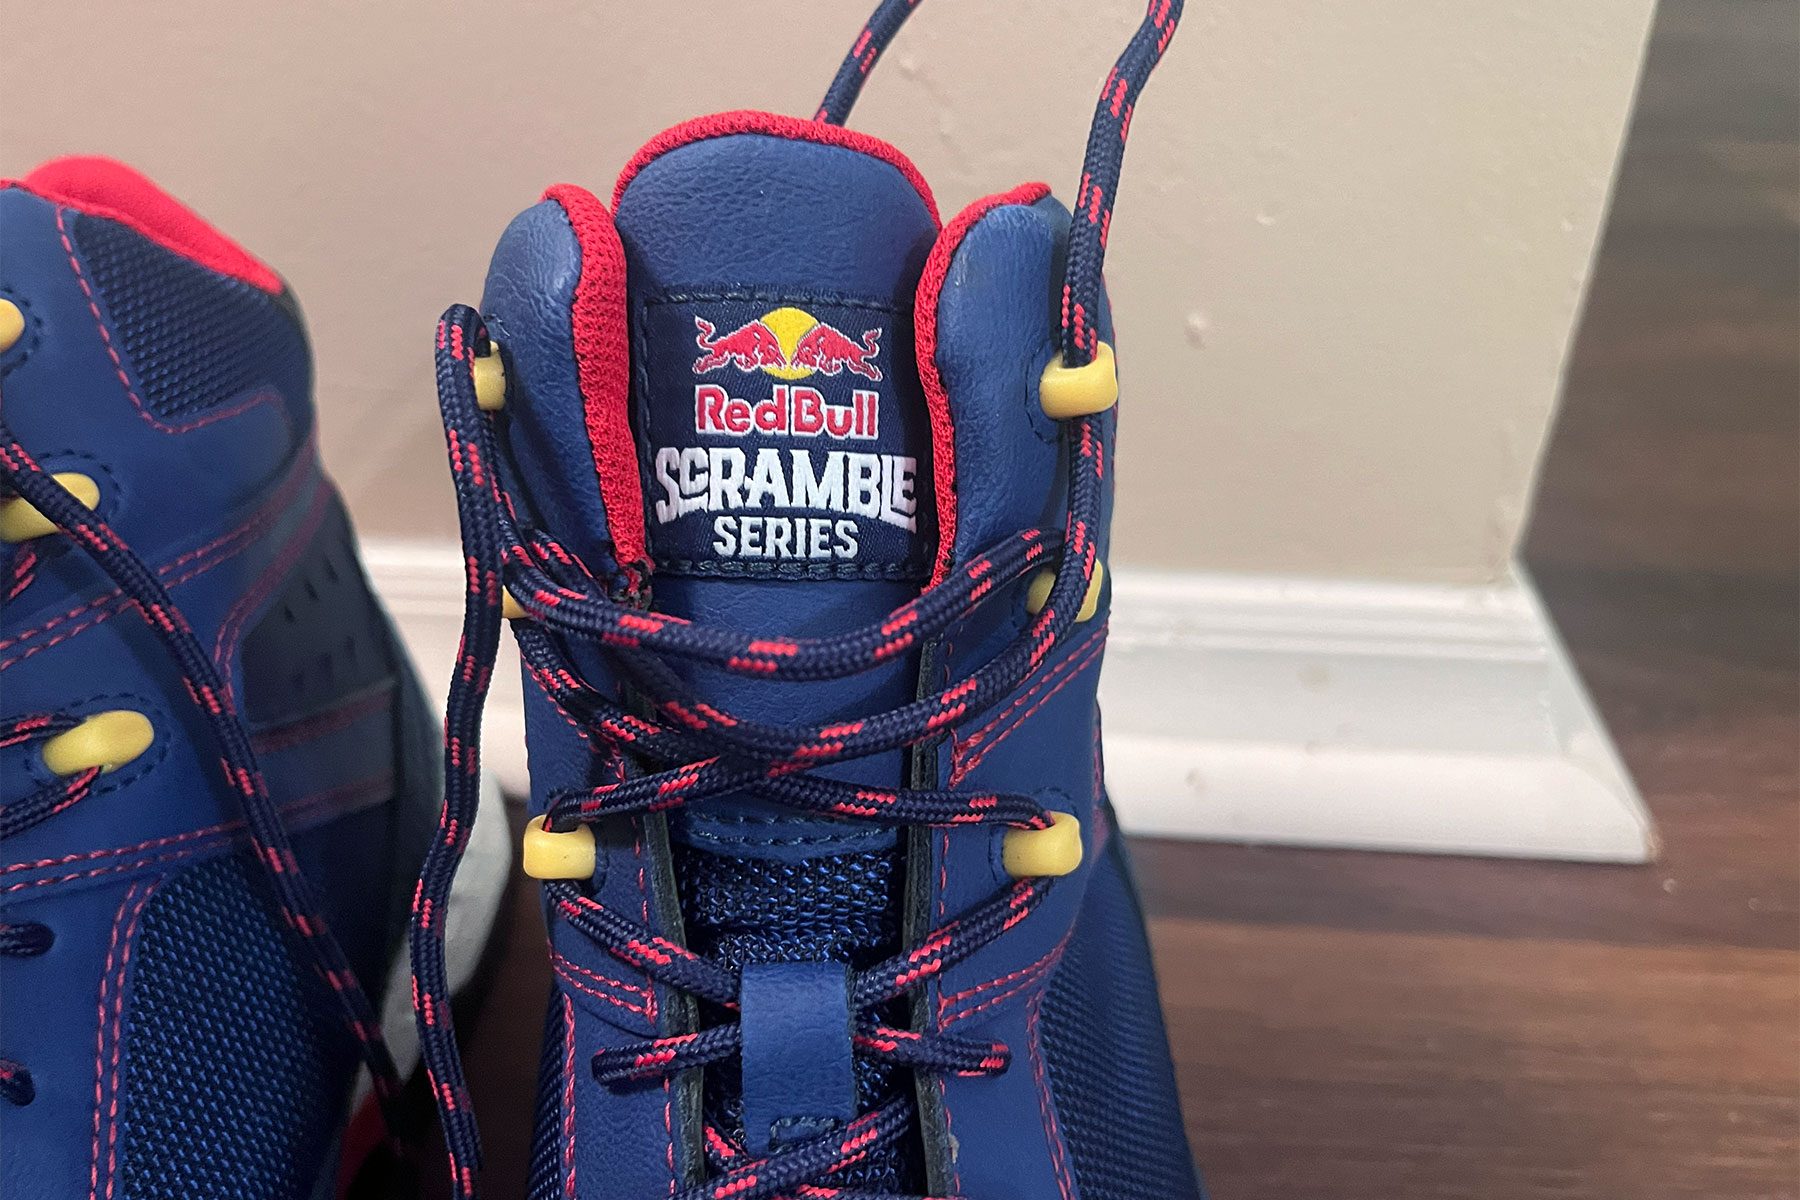 Tongue of Wolverine Hiking Boots Get A Red Bull Themed Makeover